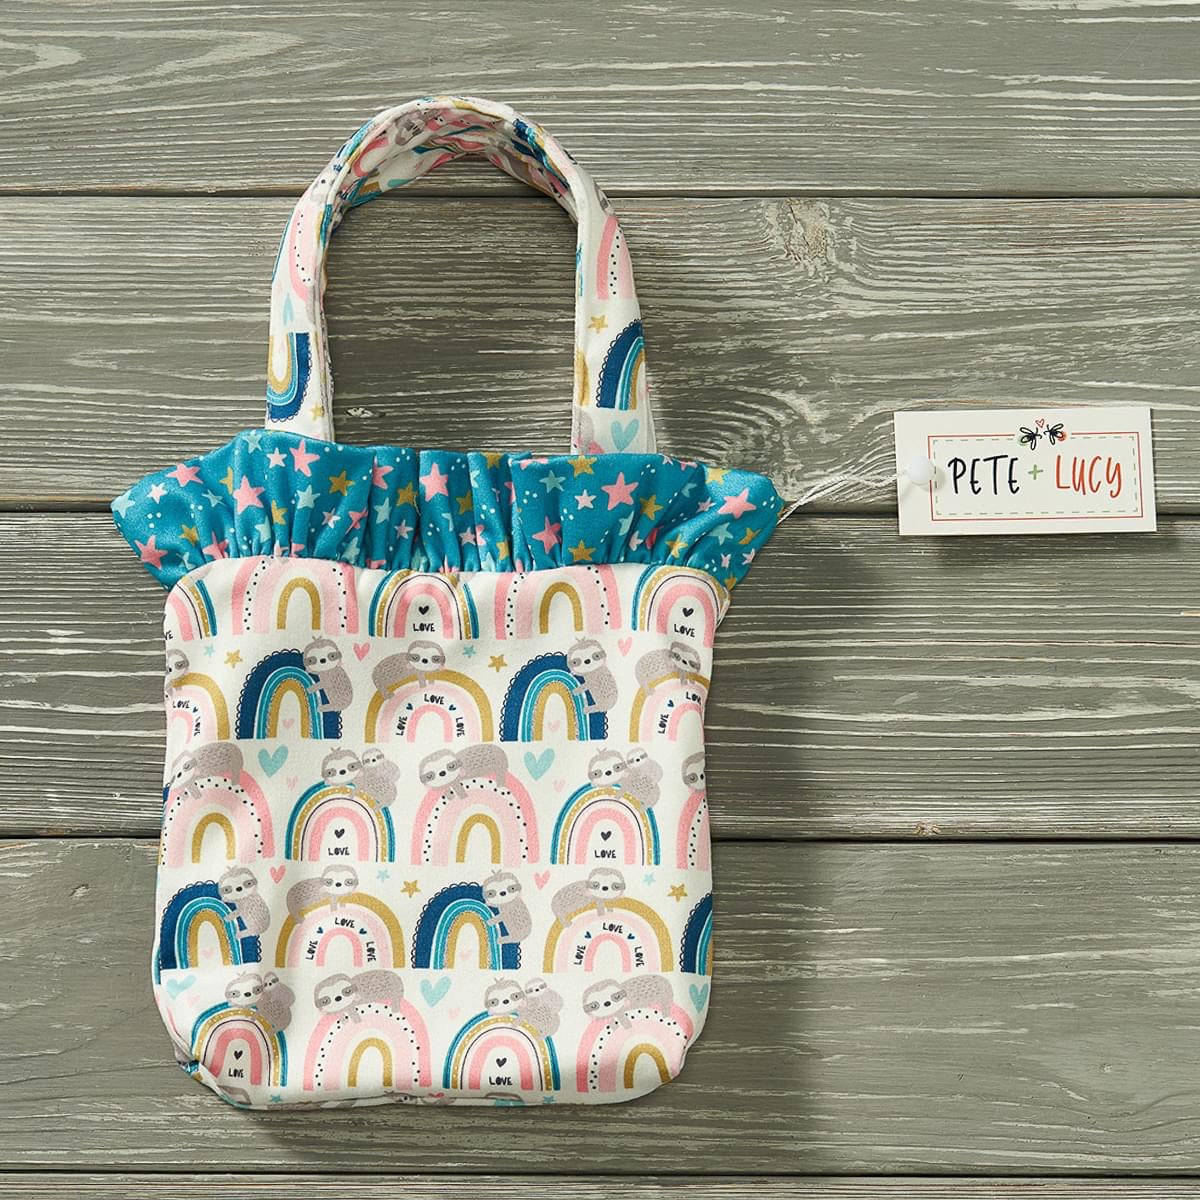 Rainbow Sloth Bucket Purse by Pete and Lucy